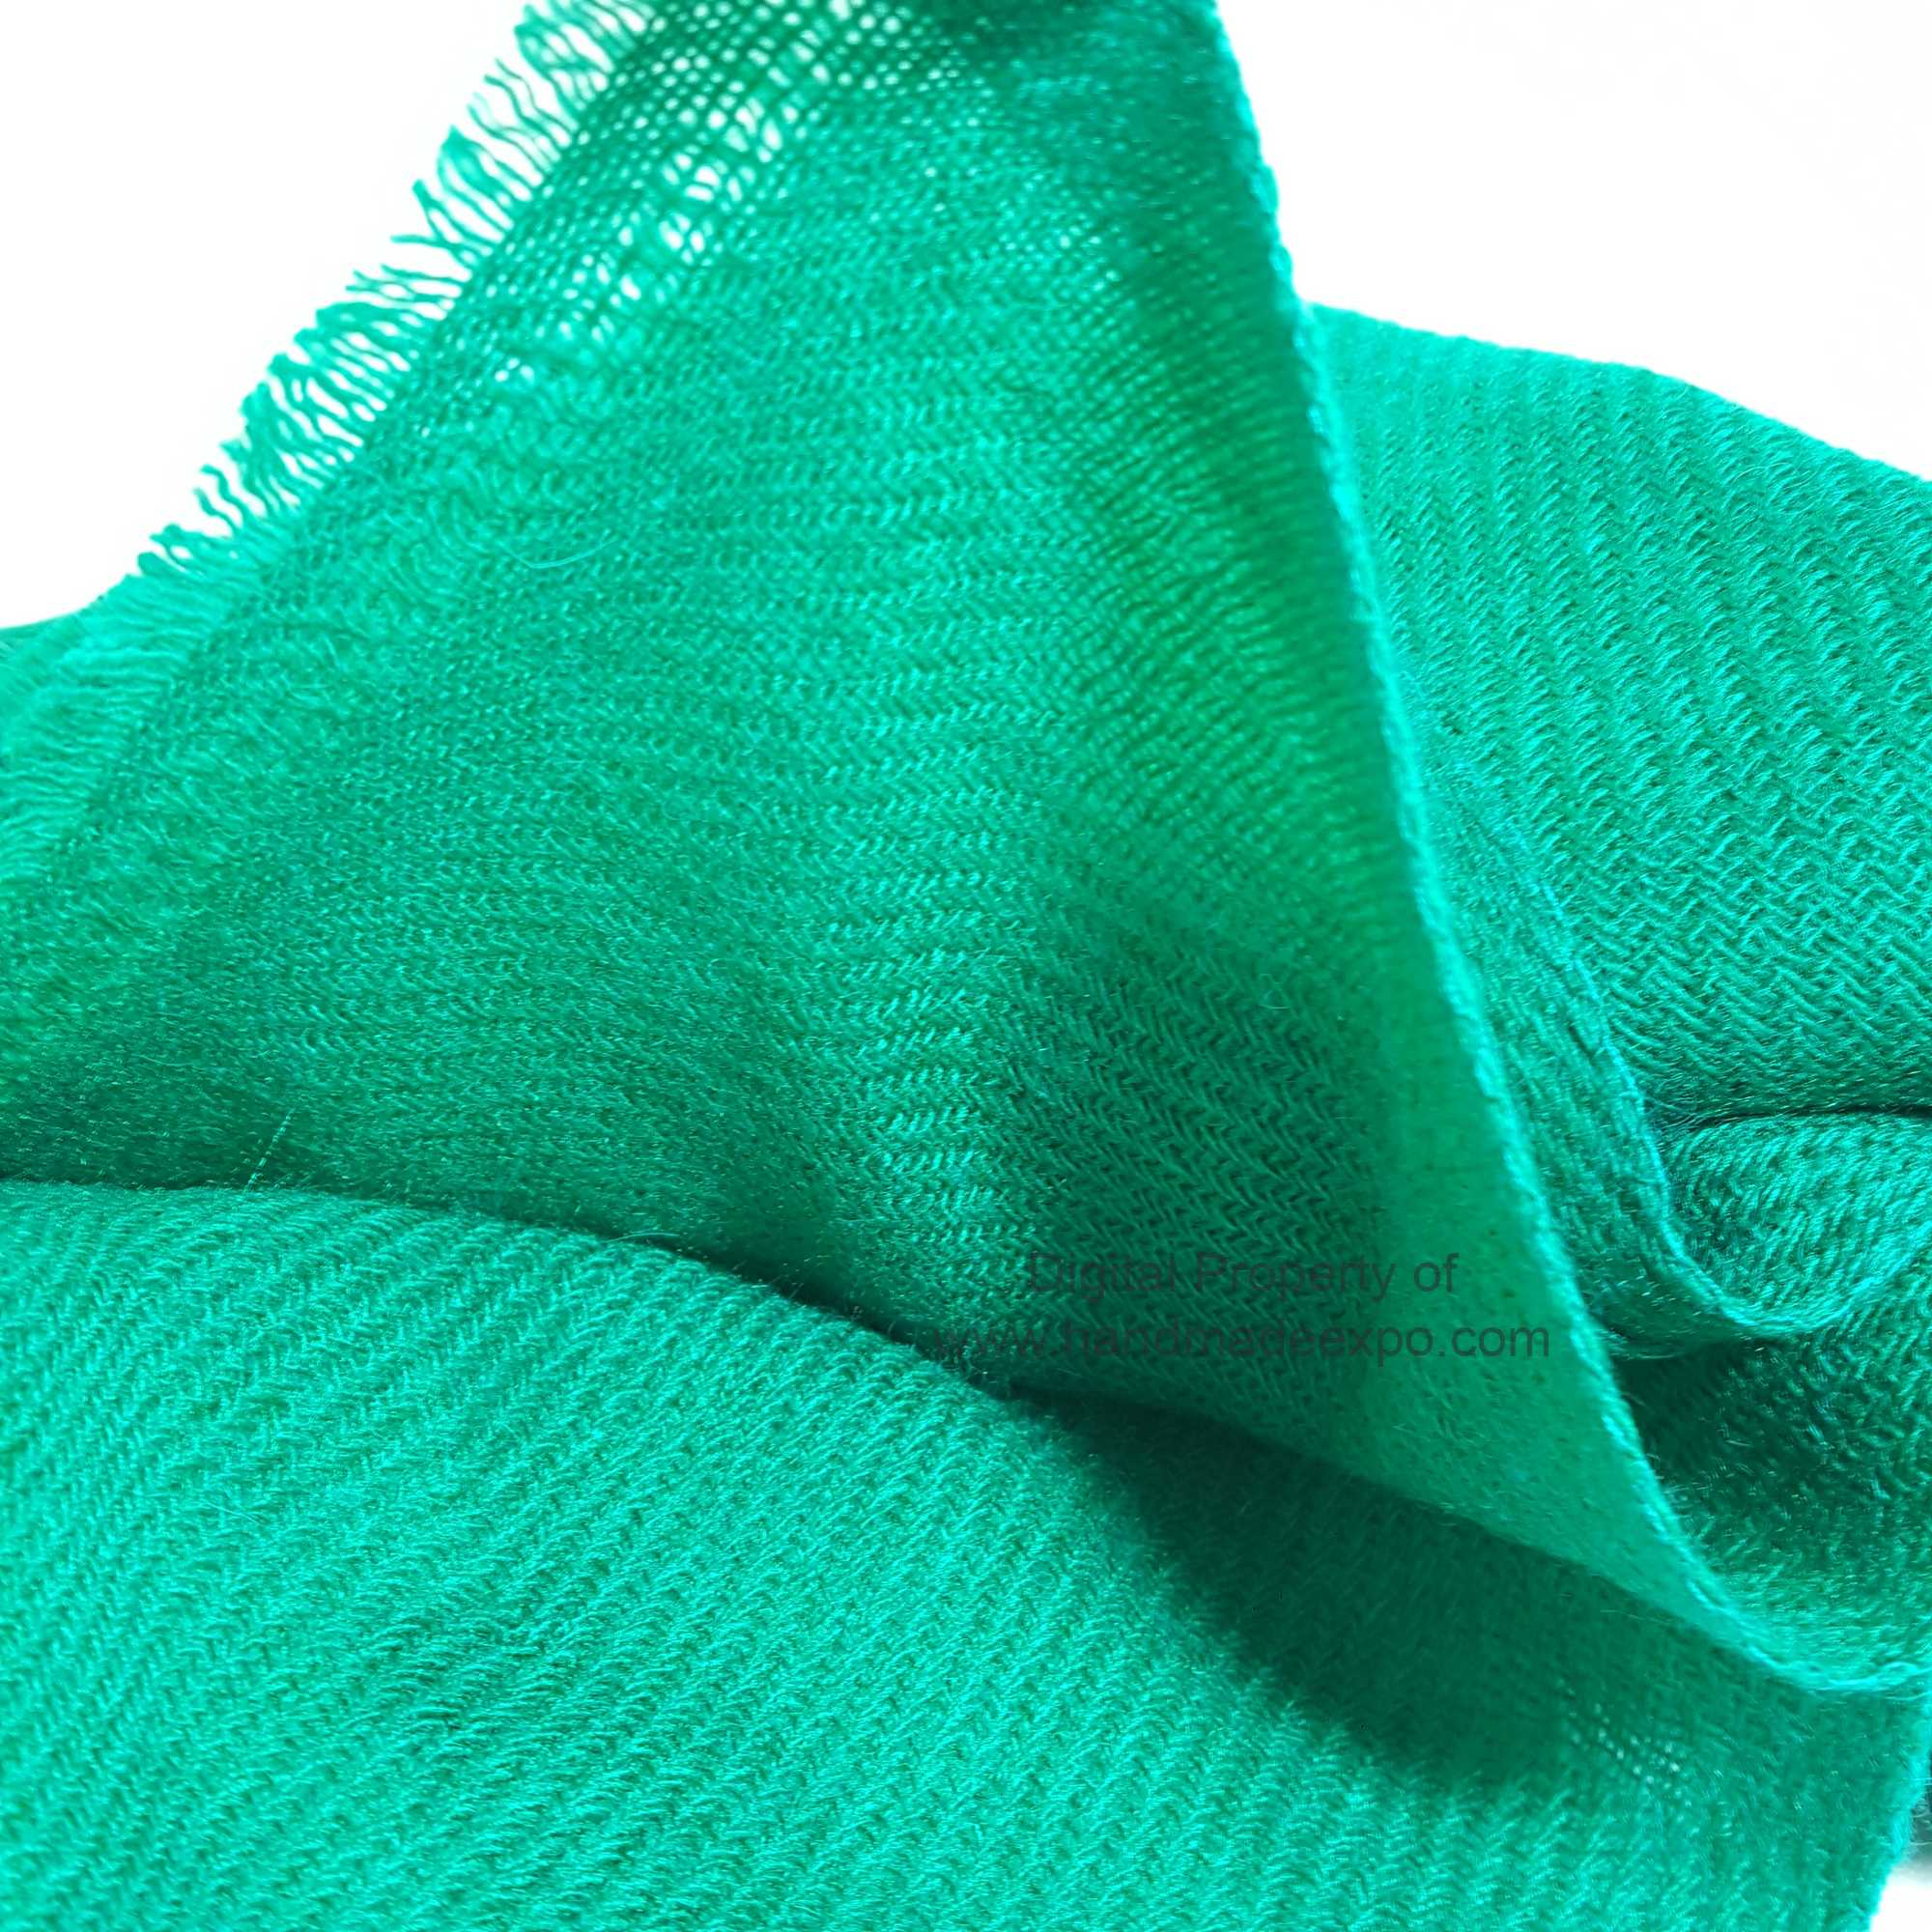 Pashmina Shawl, Nepali Handmade Shawl, In Four Ply Wool, Color Dye green Color